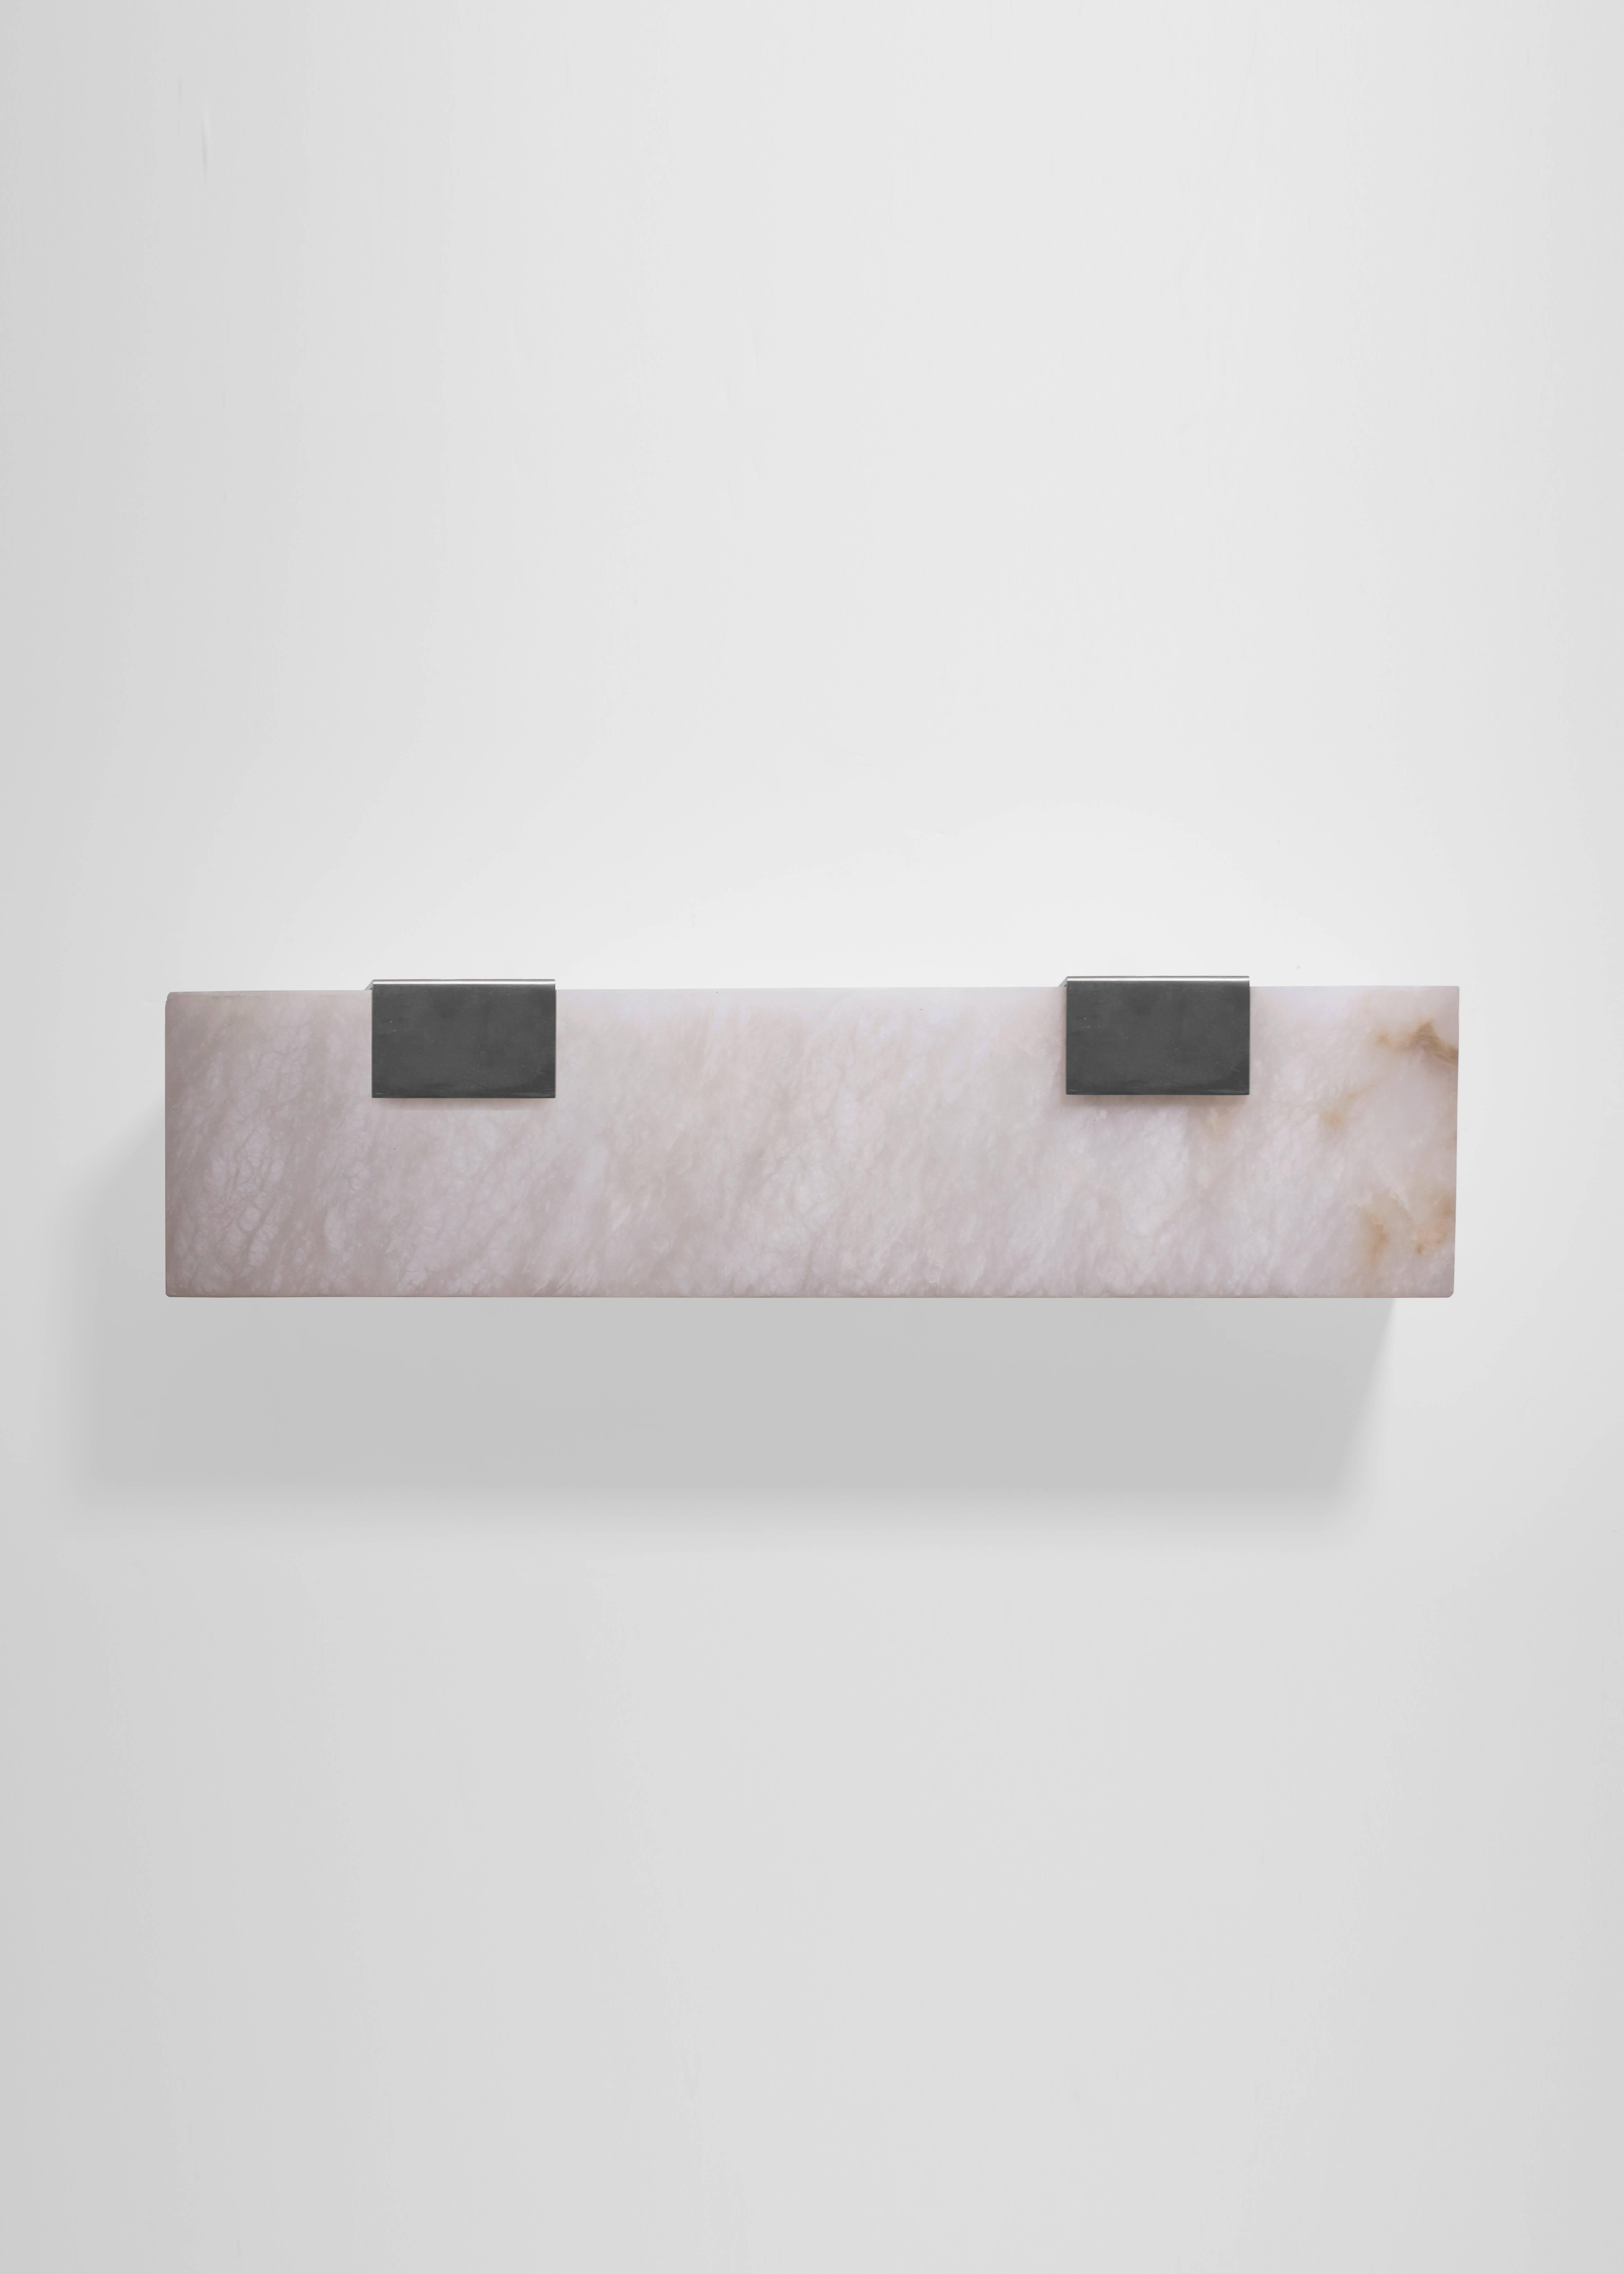 Orphan Work 003-2C Sconce, 2018
Shown in brushed nickel and alabaster 
Available in brushed brass, brushed nickel and blackened brass
Measures: 5 1/4”H x 19”W x 3 7/8”D
Wall or ceiling mount
Vertical or horizontal
Plug-in by request 
1-4 adjustable